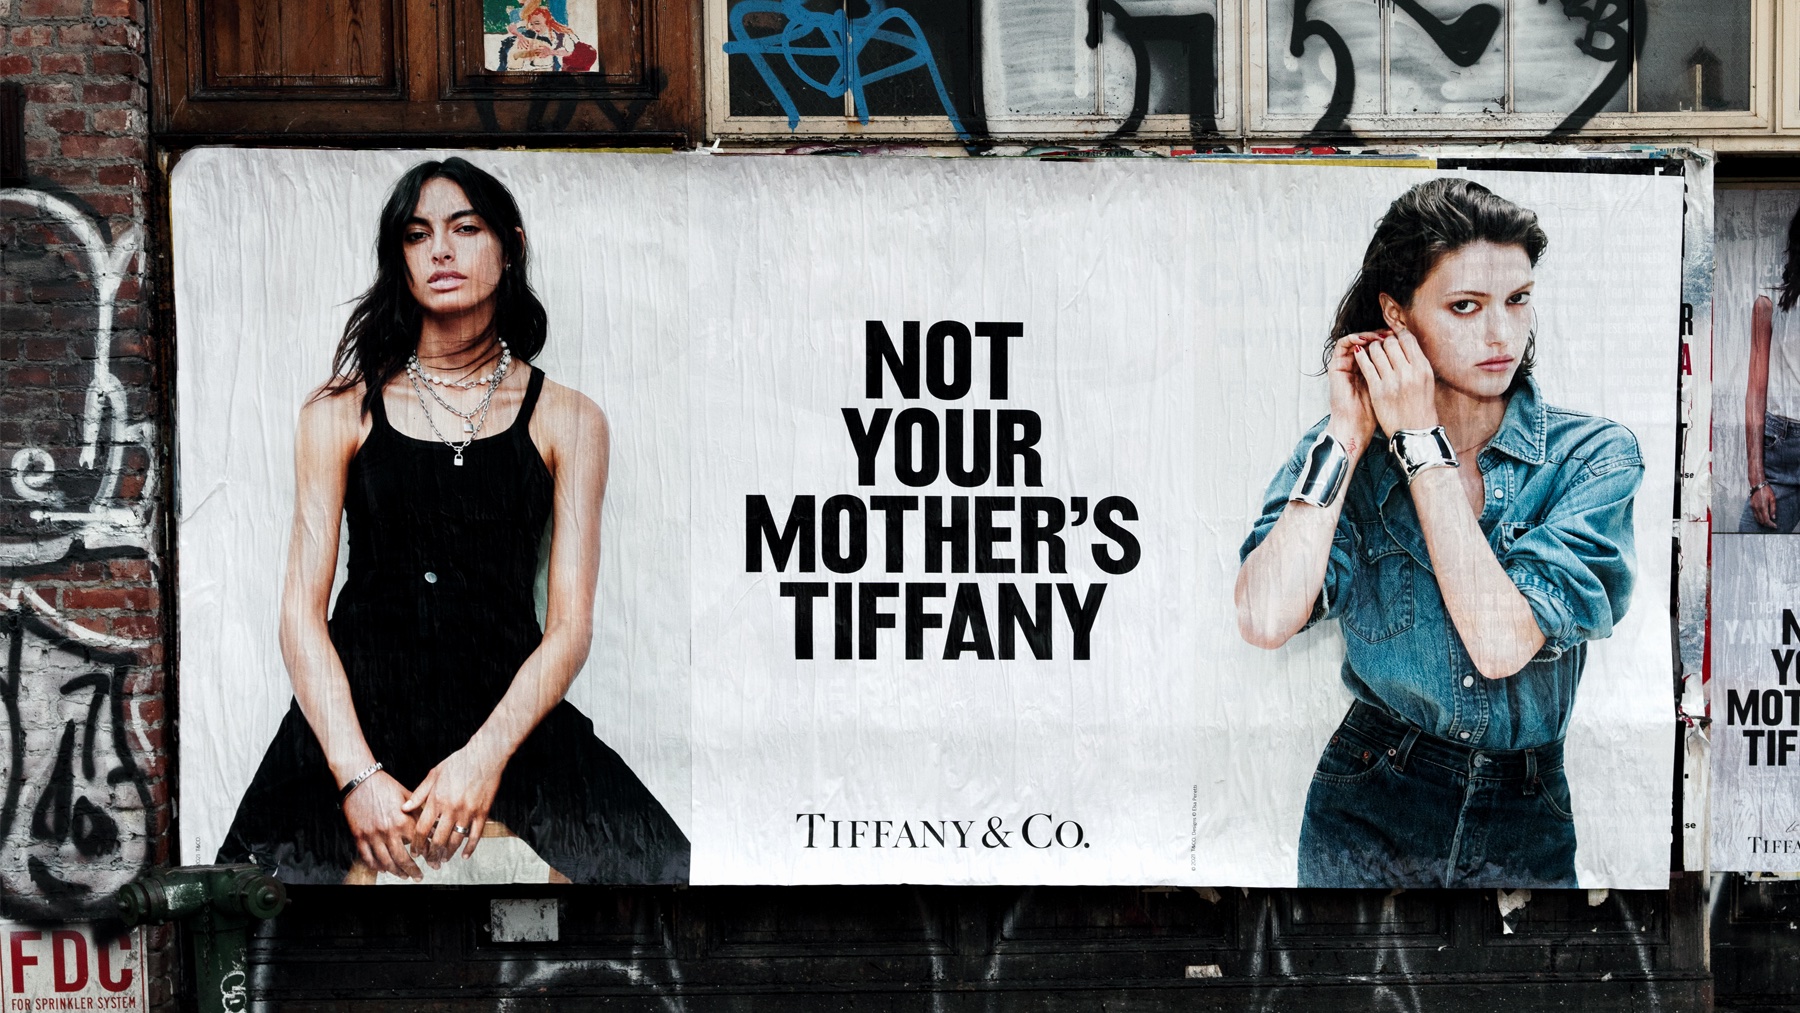 LVMH's Acquisition of Tiffany Shows How to Pull Off a Successful